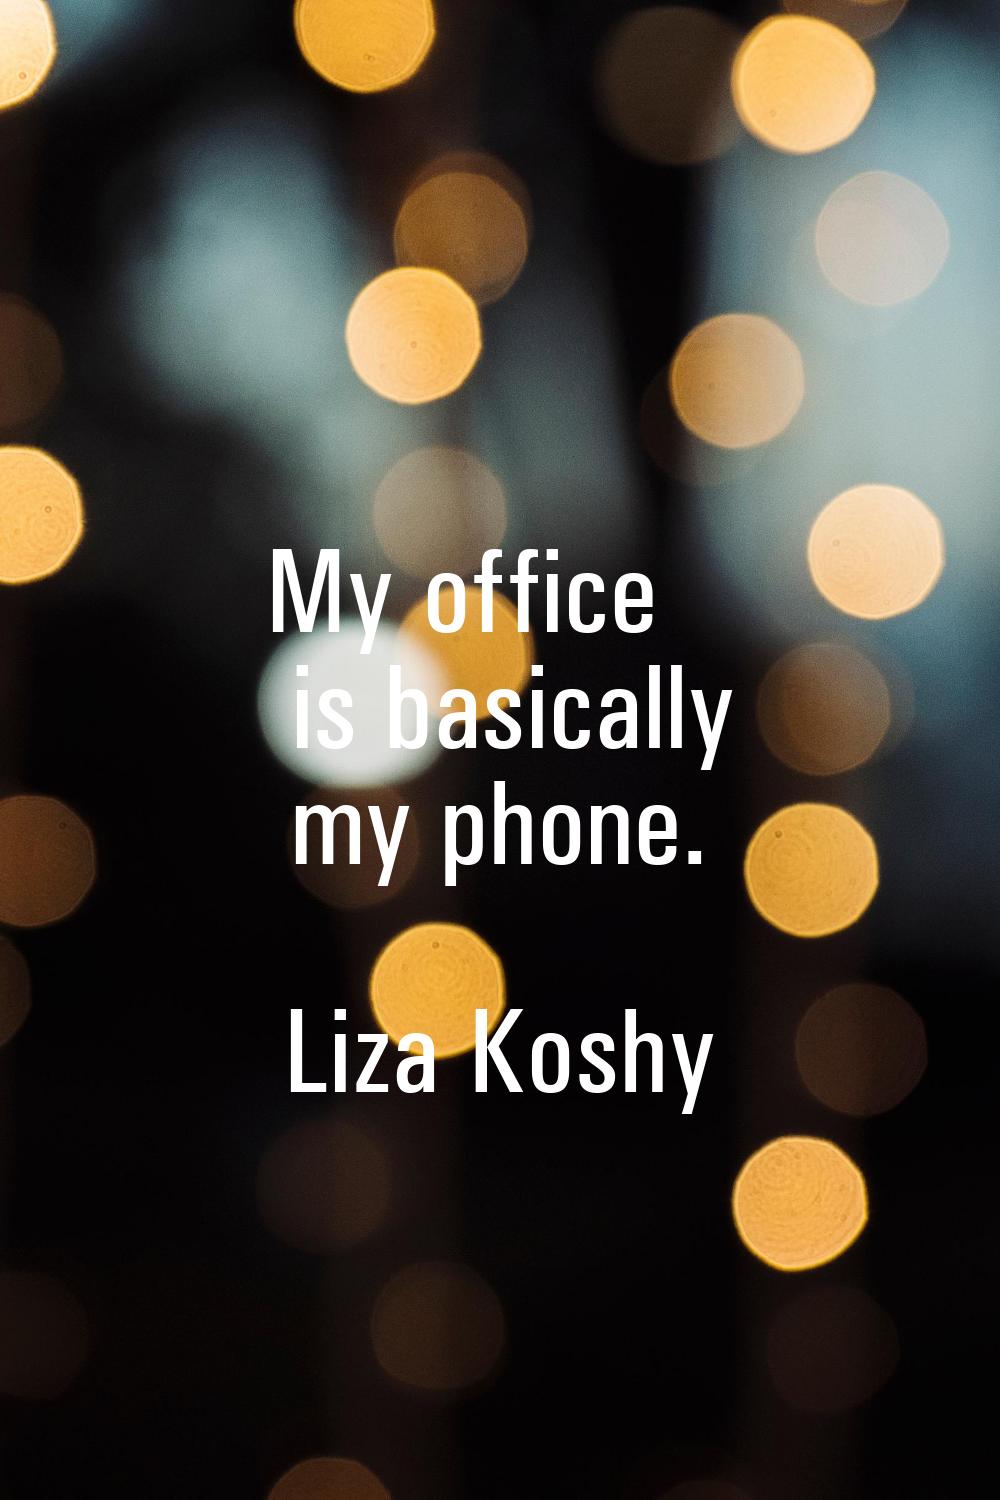 My office is basically my phone.